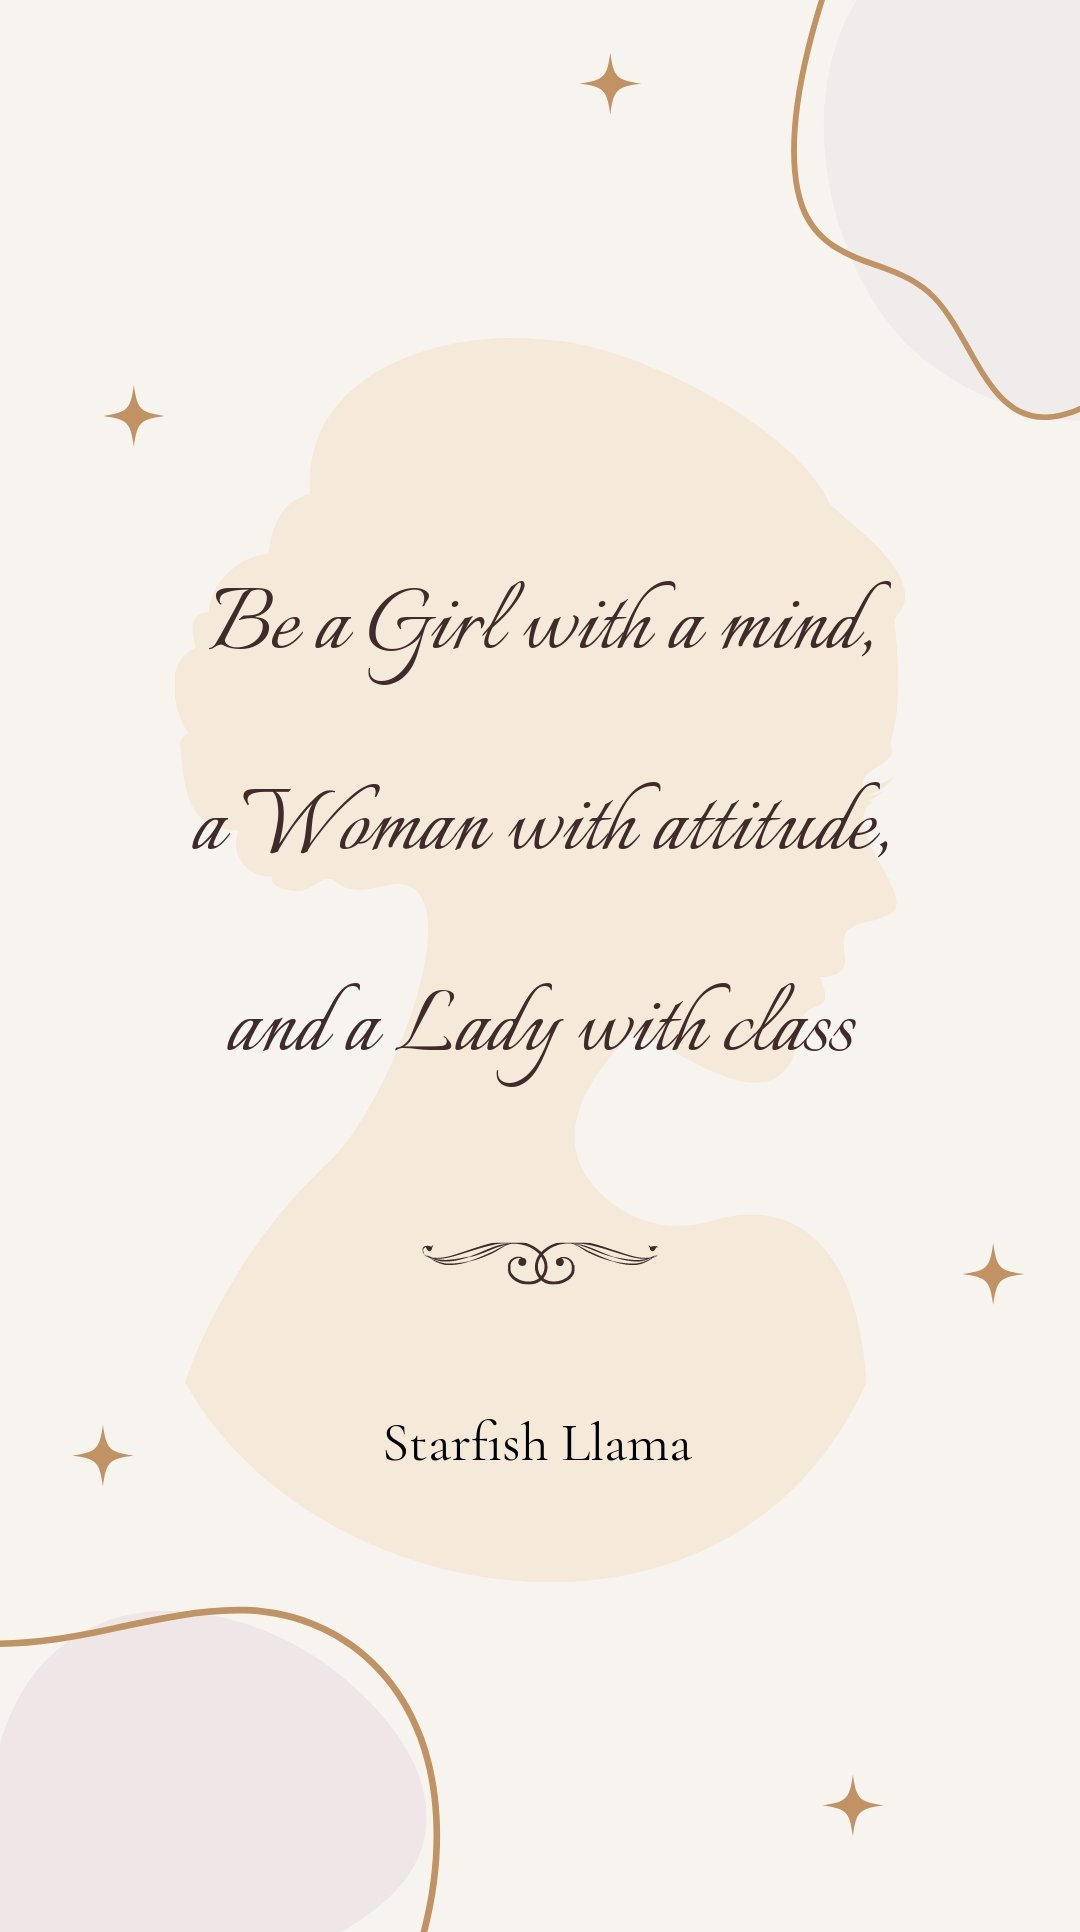 Starfish Llama - Be a Girl with a mind, a Woman with attitude, and a Lady with class